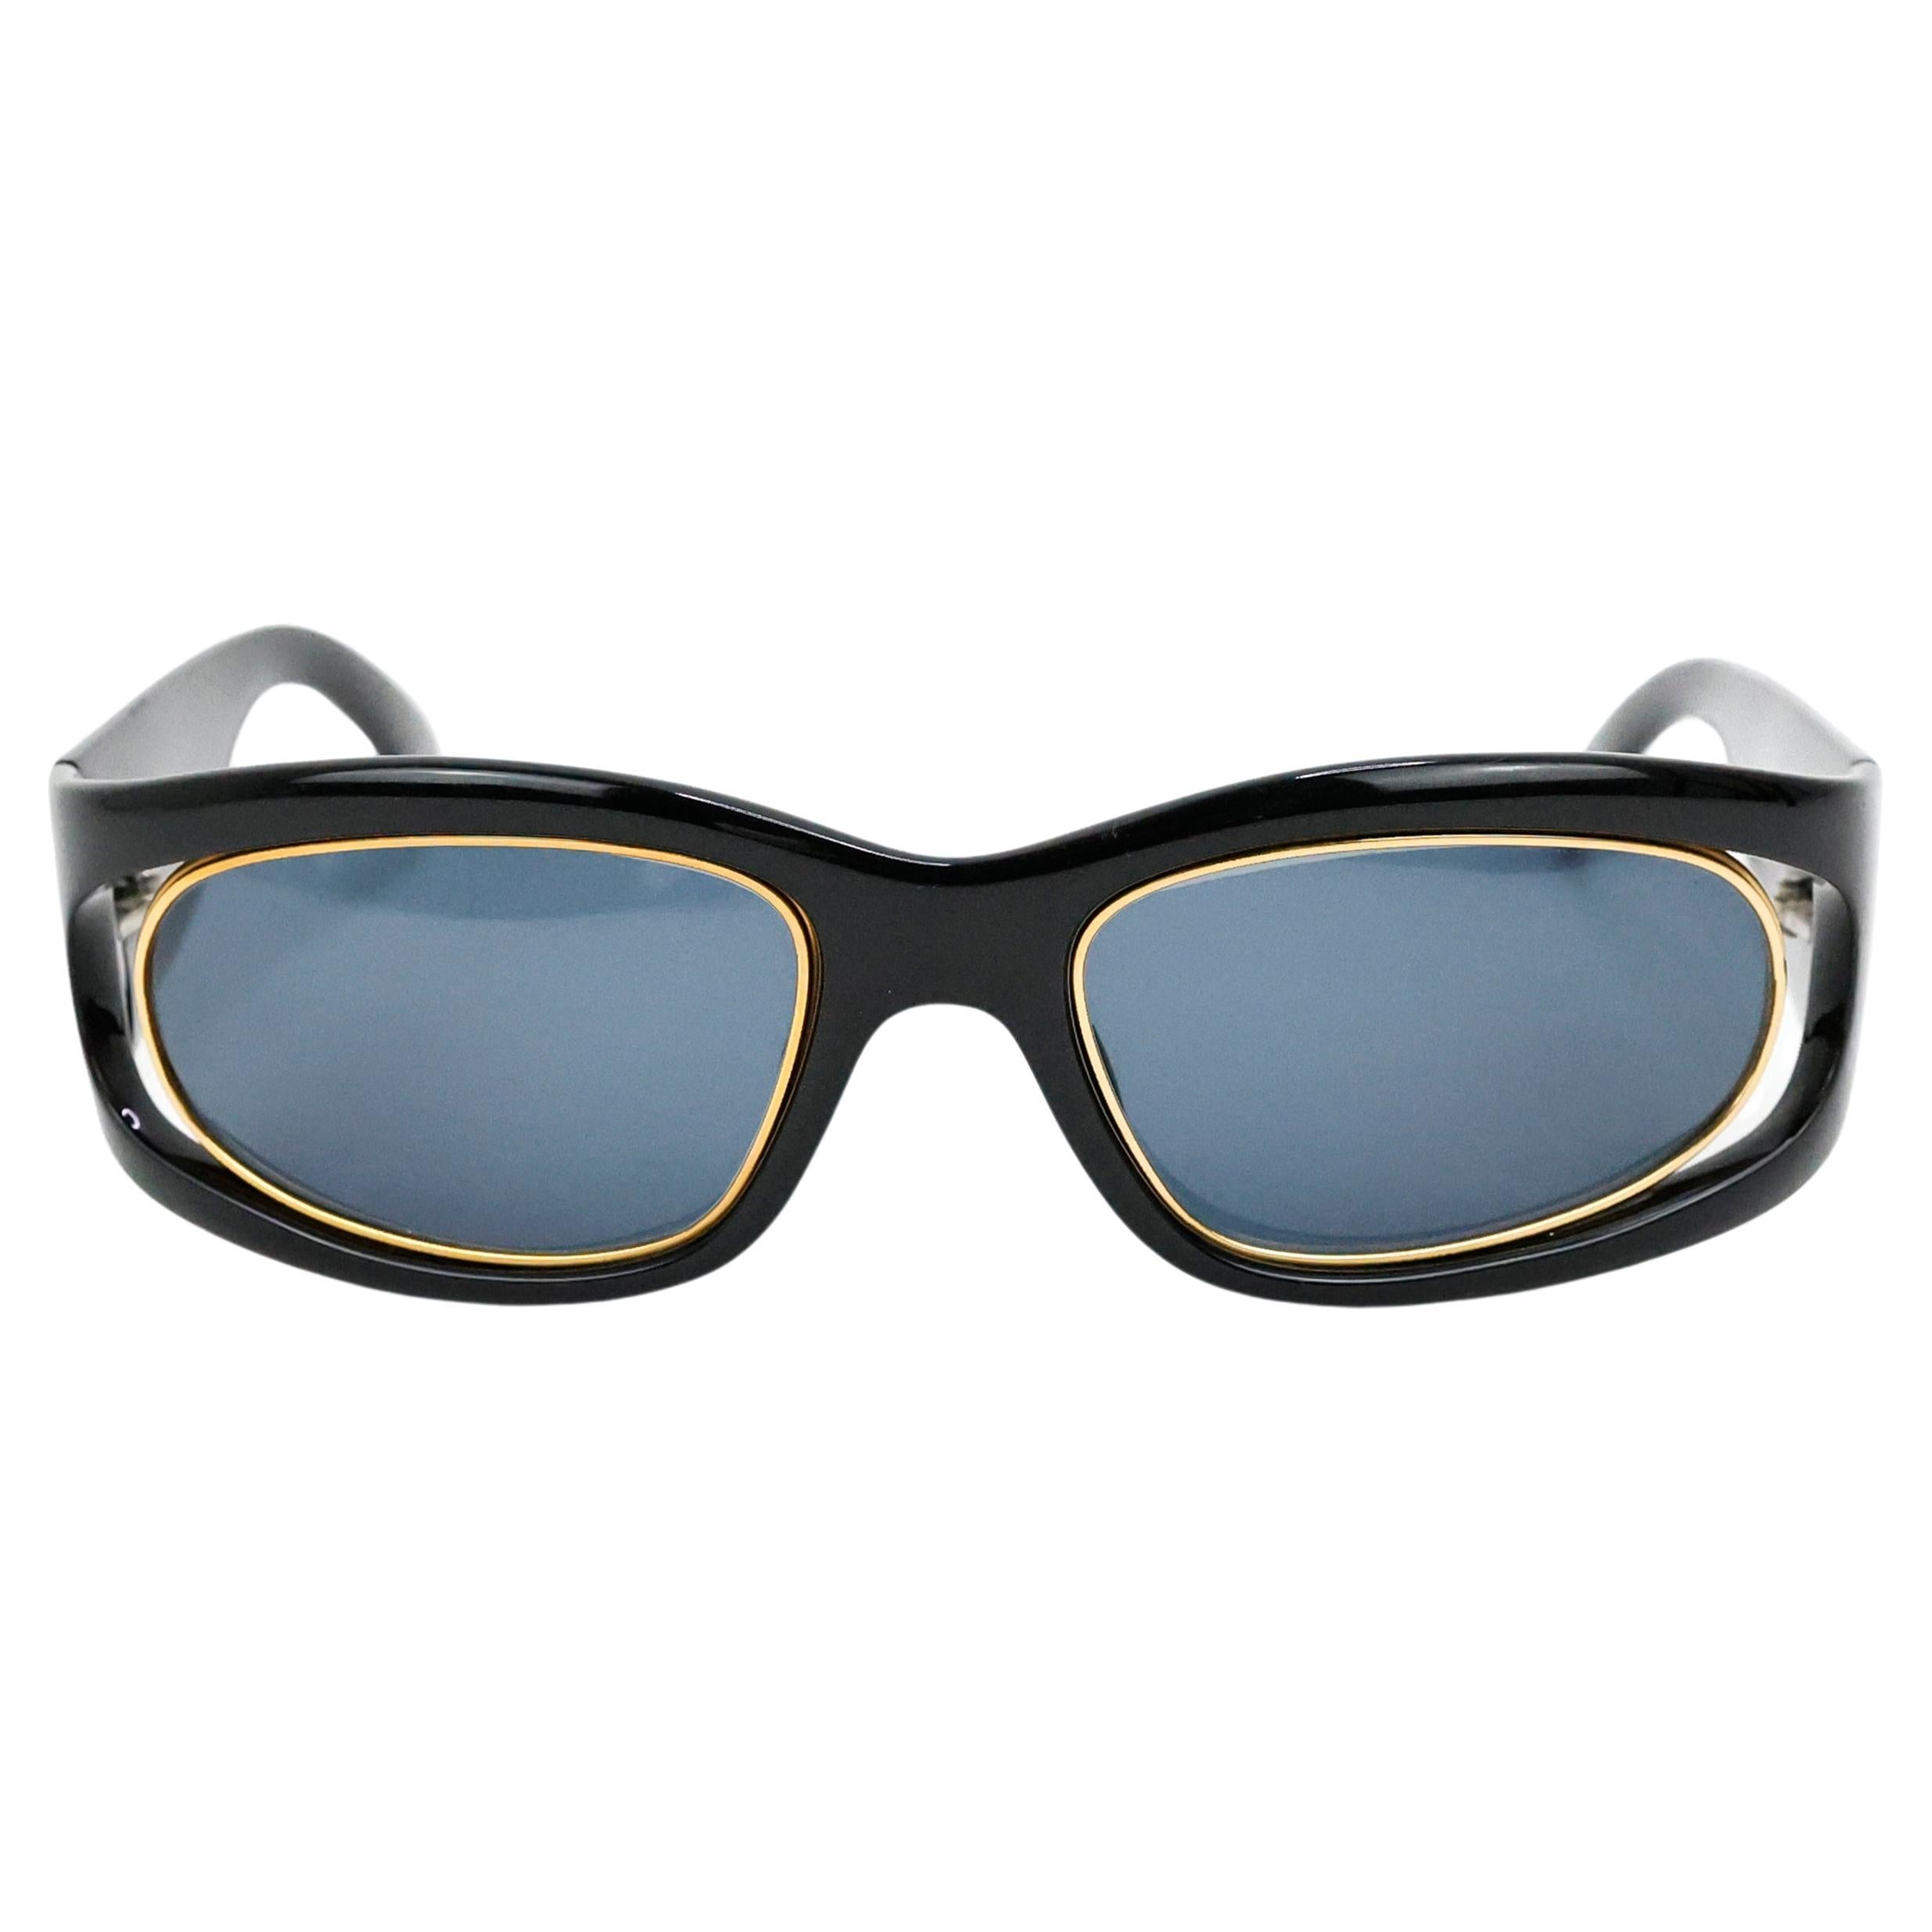 Dior Sunglasses mod. CD2040 Black and Gold For Sale